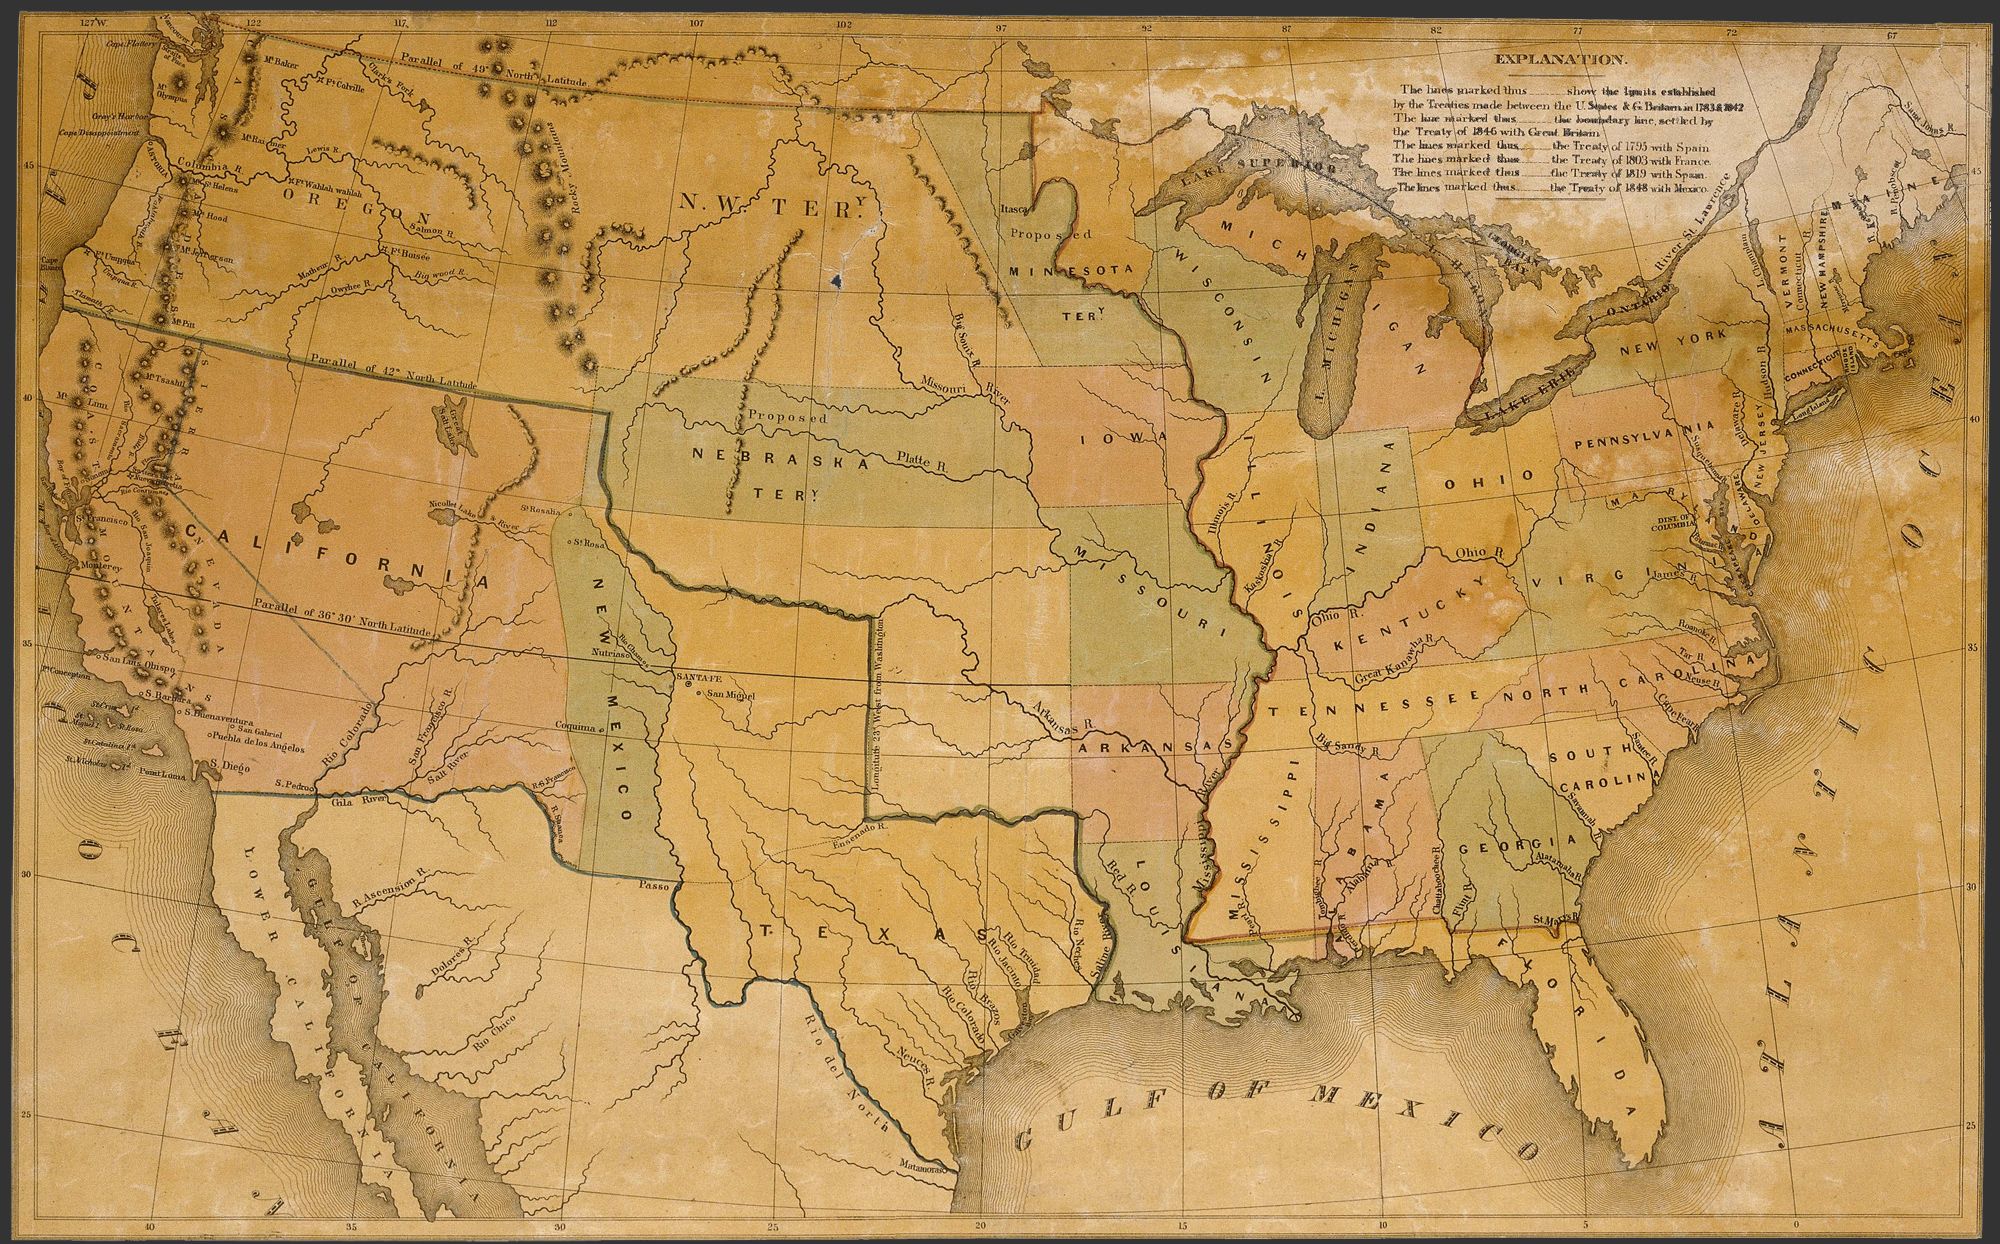 Map of the United States, 1848